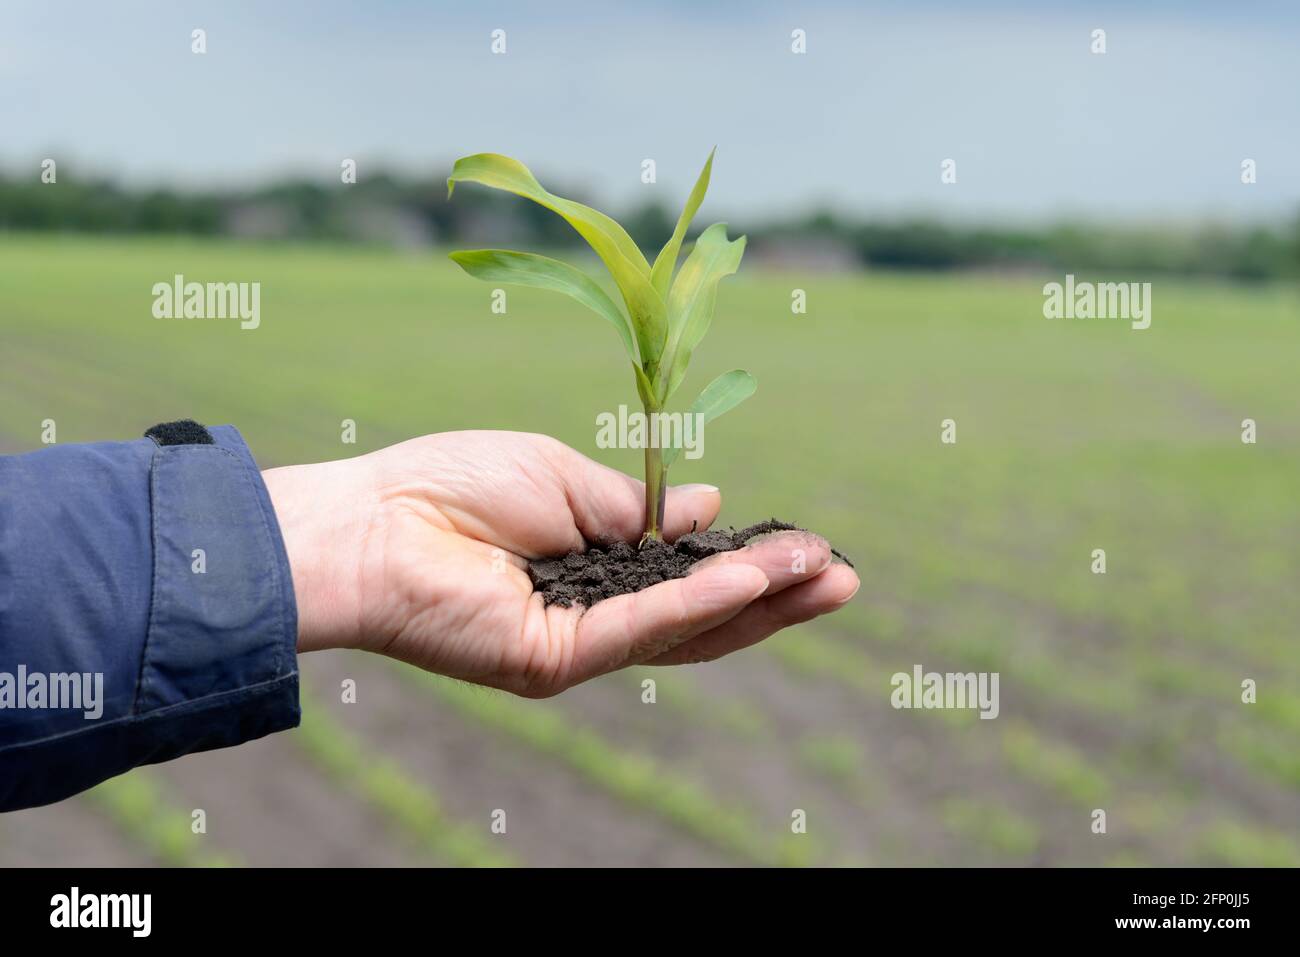 Hand holding a corn plant Stock Photo